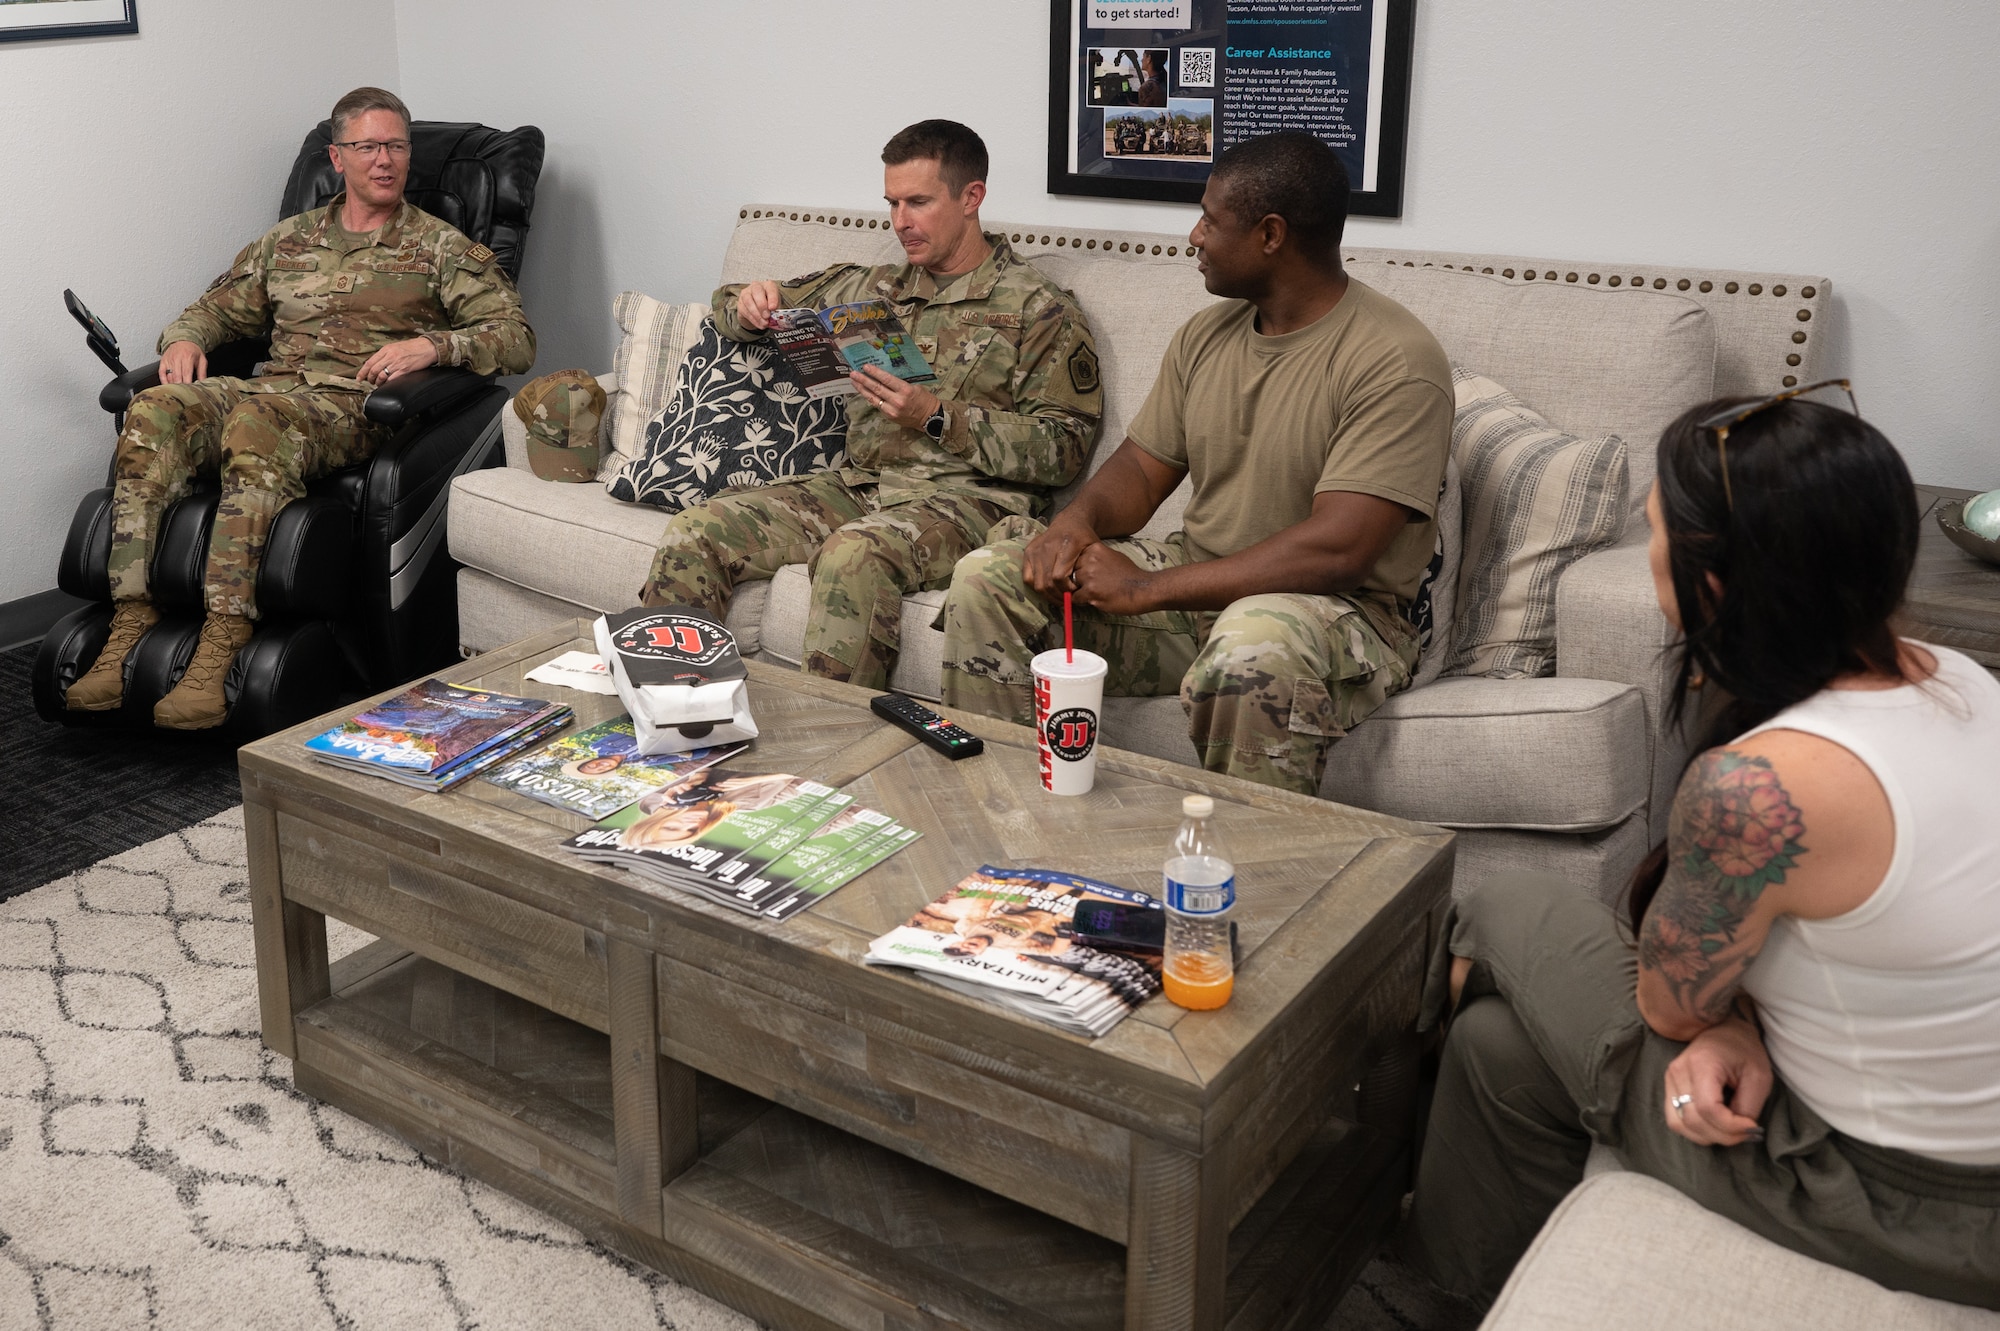 U.S. Air Force Chief Master Sgt. Michael Becker, 355th Wing command chief, sitting in a massage chair on the left, and Col. Scott Mills, 355th Wing commander, sitting on a sofa to the right of Becker, visit the welcome center at Davis-Monthan Air Force Base, Ariz., July 18, 2023. Two members of the welcome center team are seated to the right of Mills. The command team regularly met with units and organizations on base to connect with them. (U.S. Air Force photo by Airman 1st Class Jasmyne Bridgers-Matos)